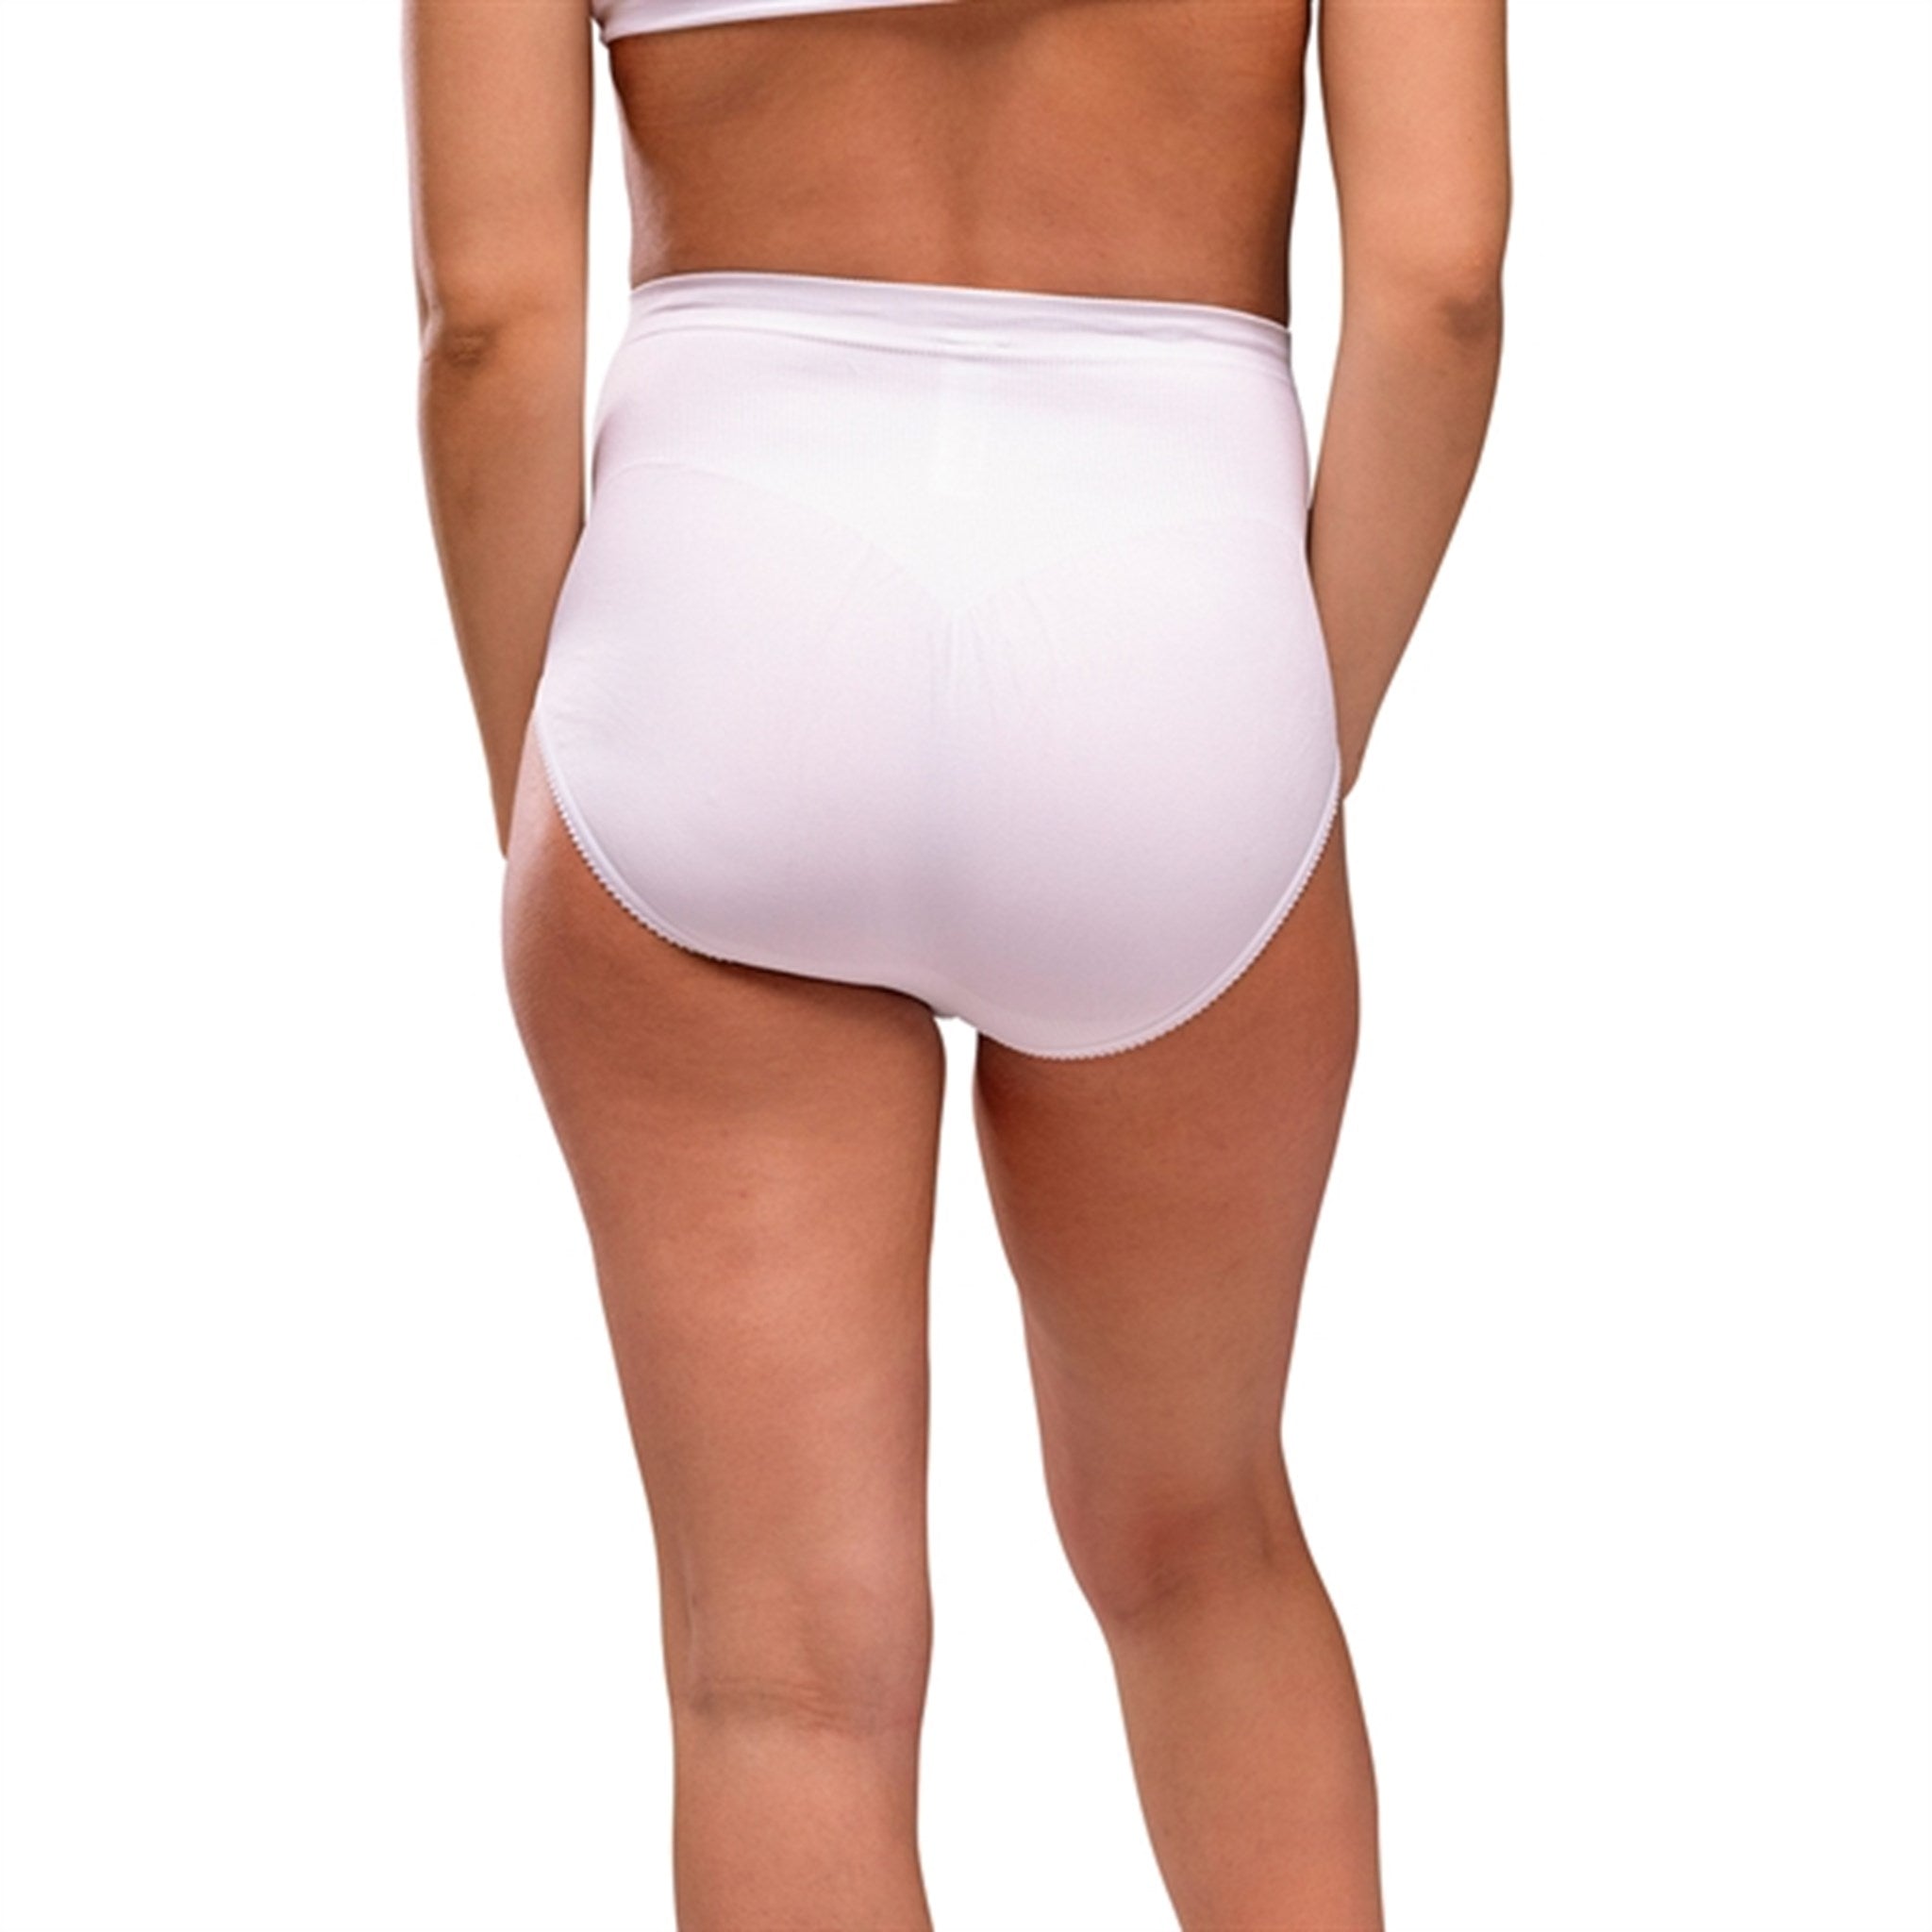 Carriwell Maternity Support Panty White 9